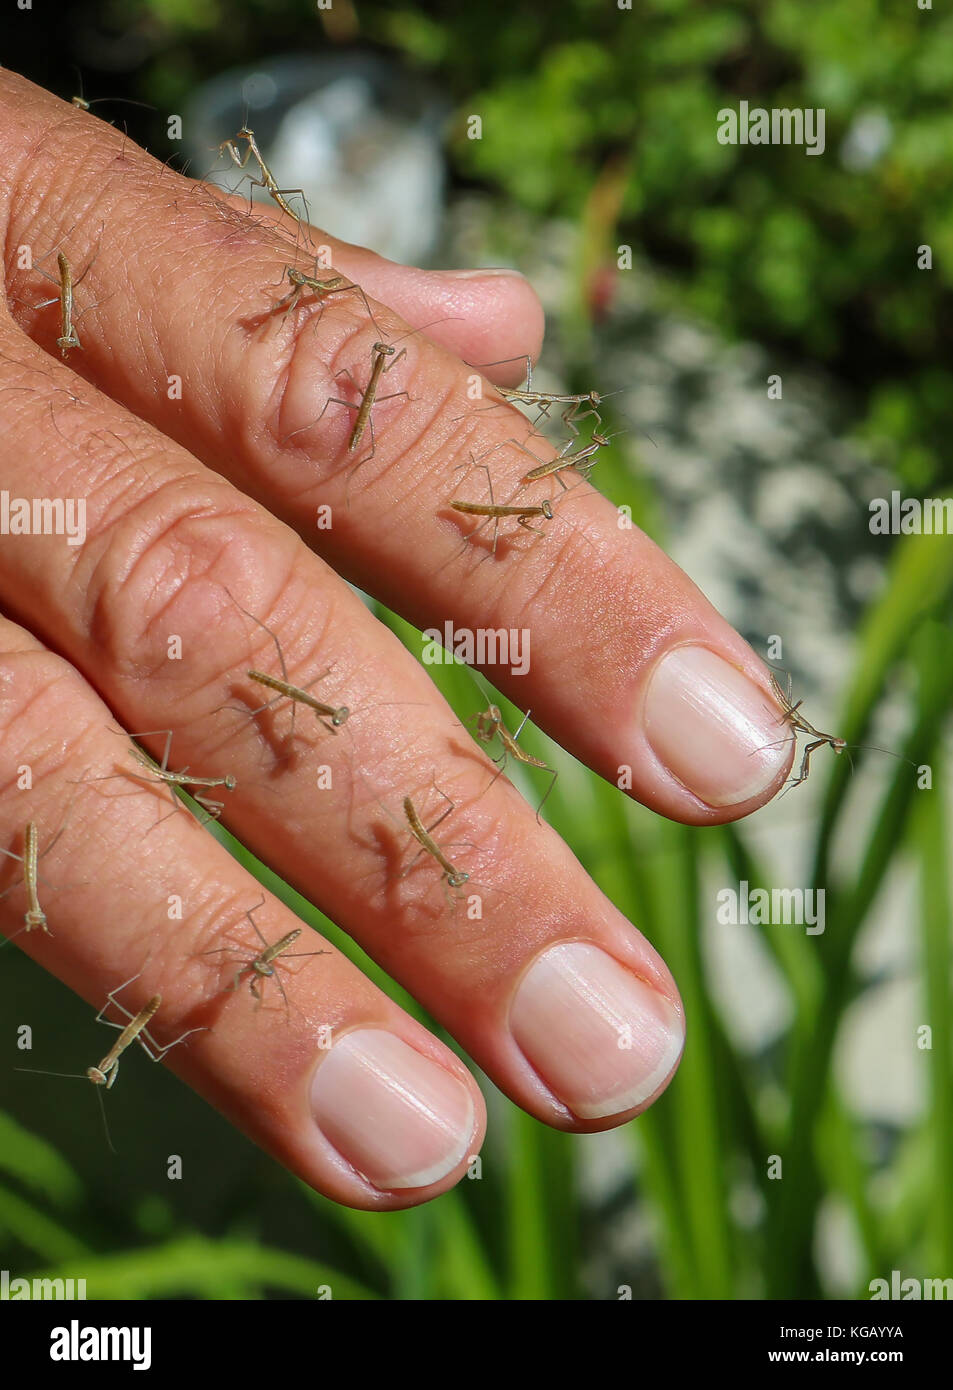 Fingers Covered in Newly Hatched Baby Praying Mantis Insects Stock Photo